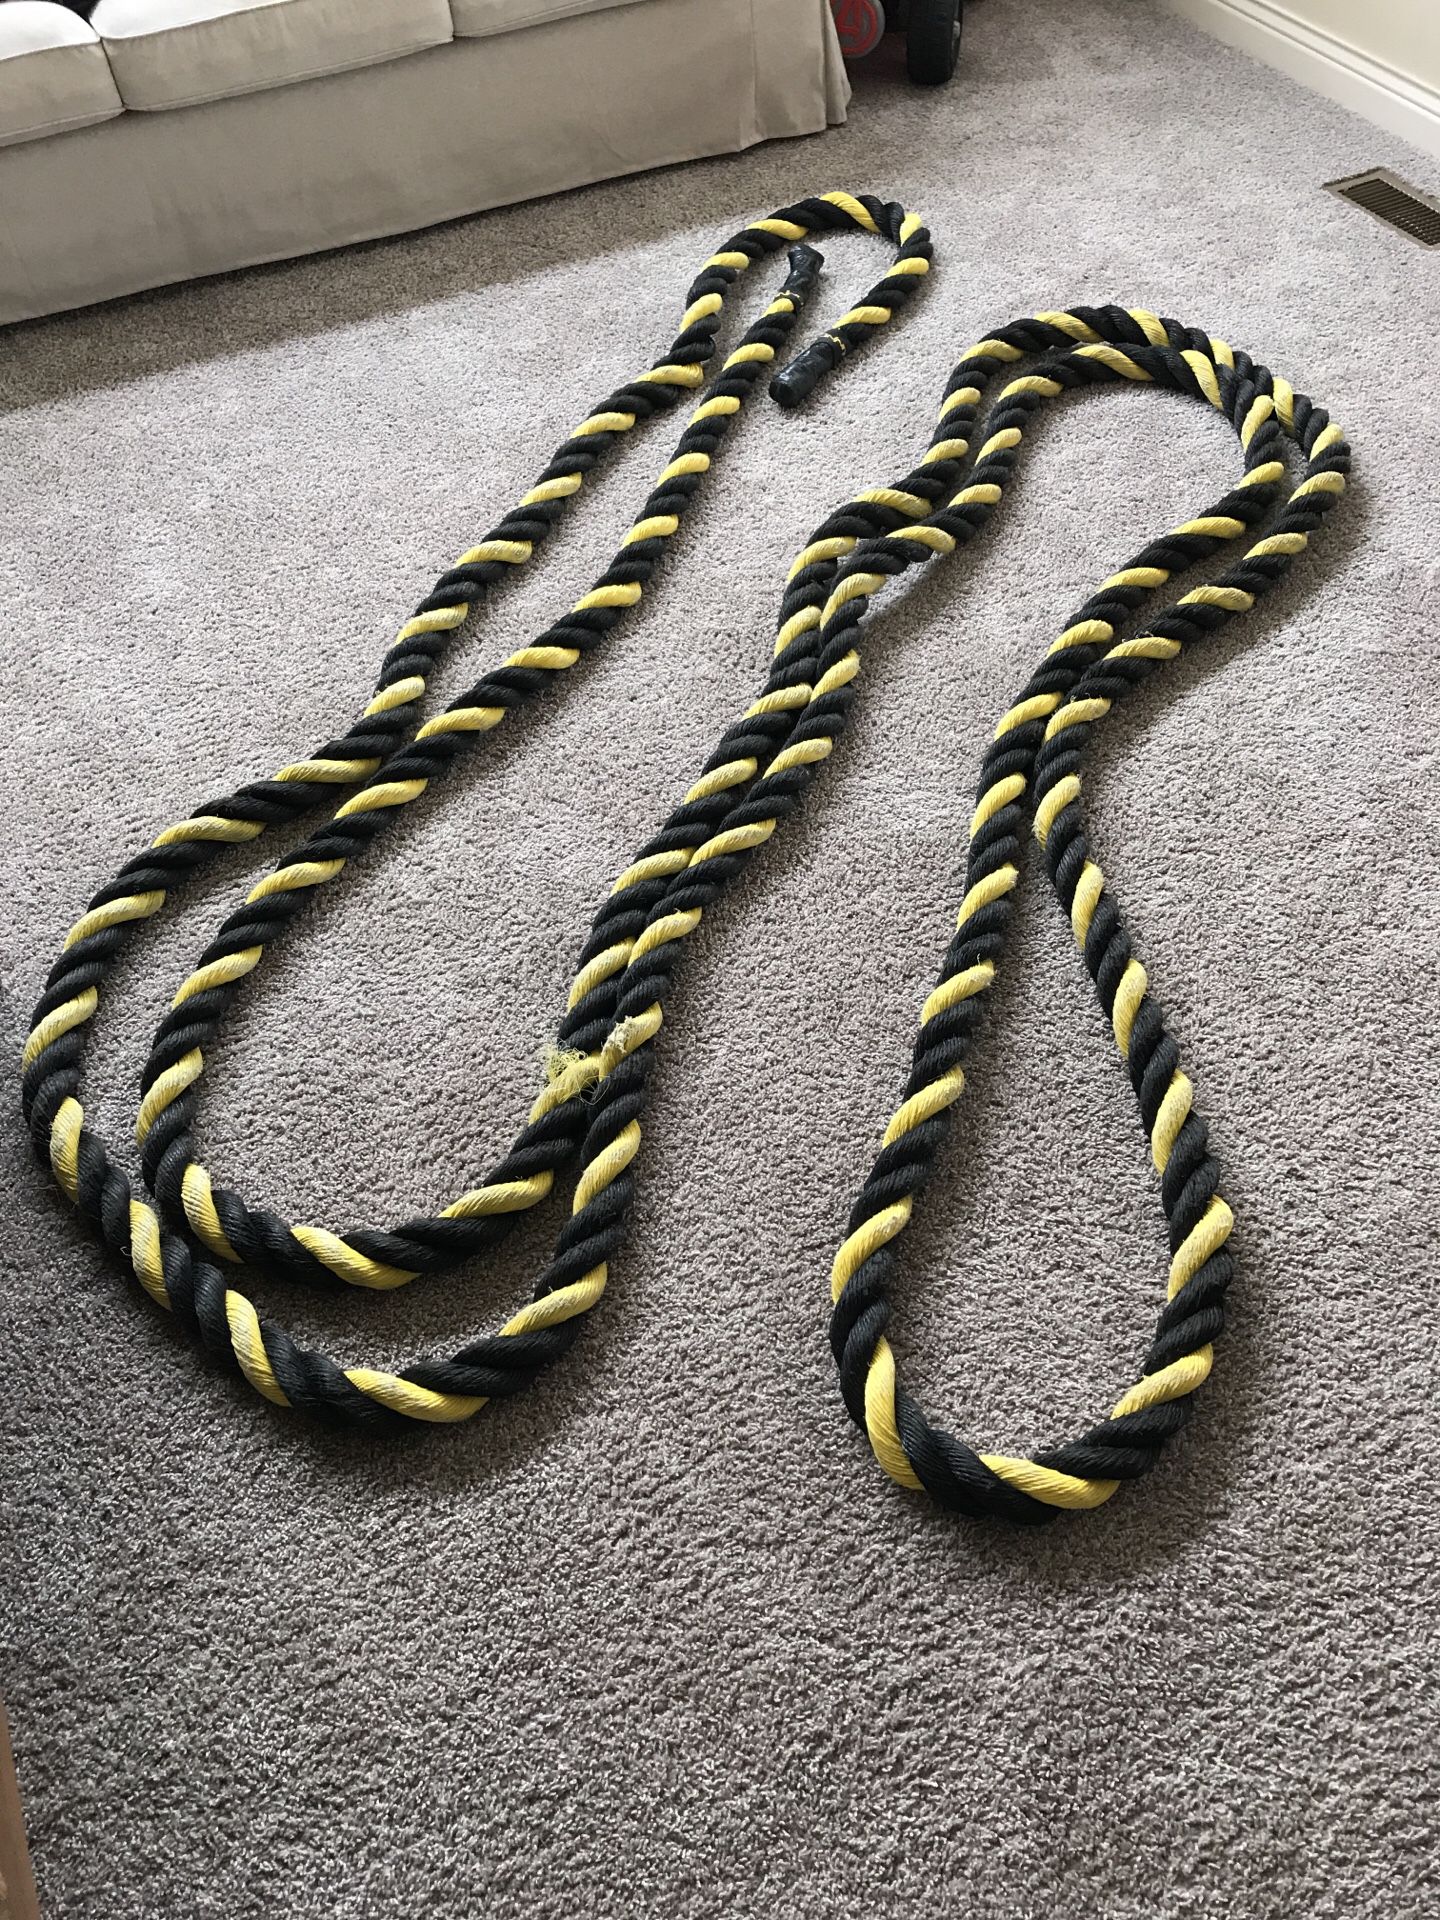 CrossFit exercise rope